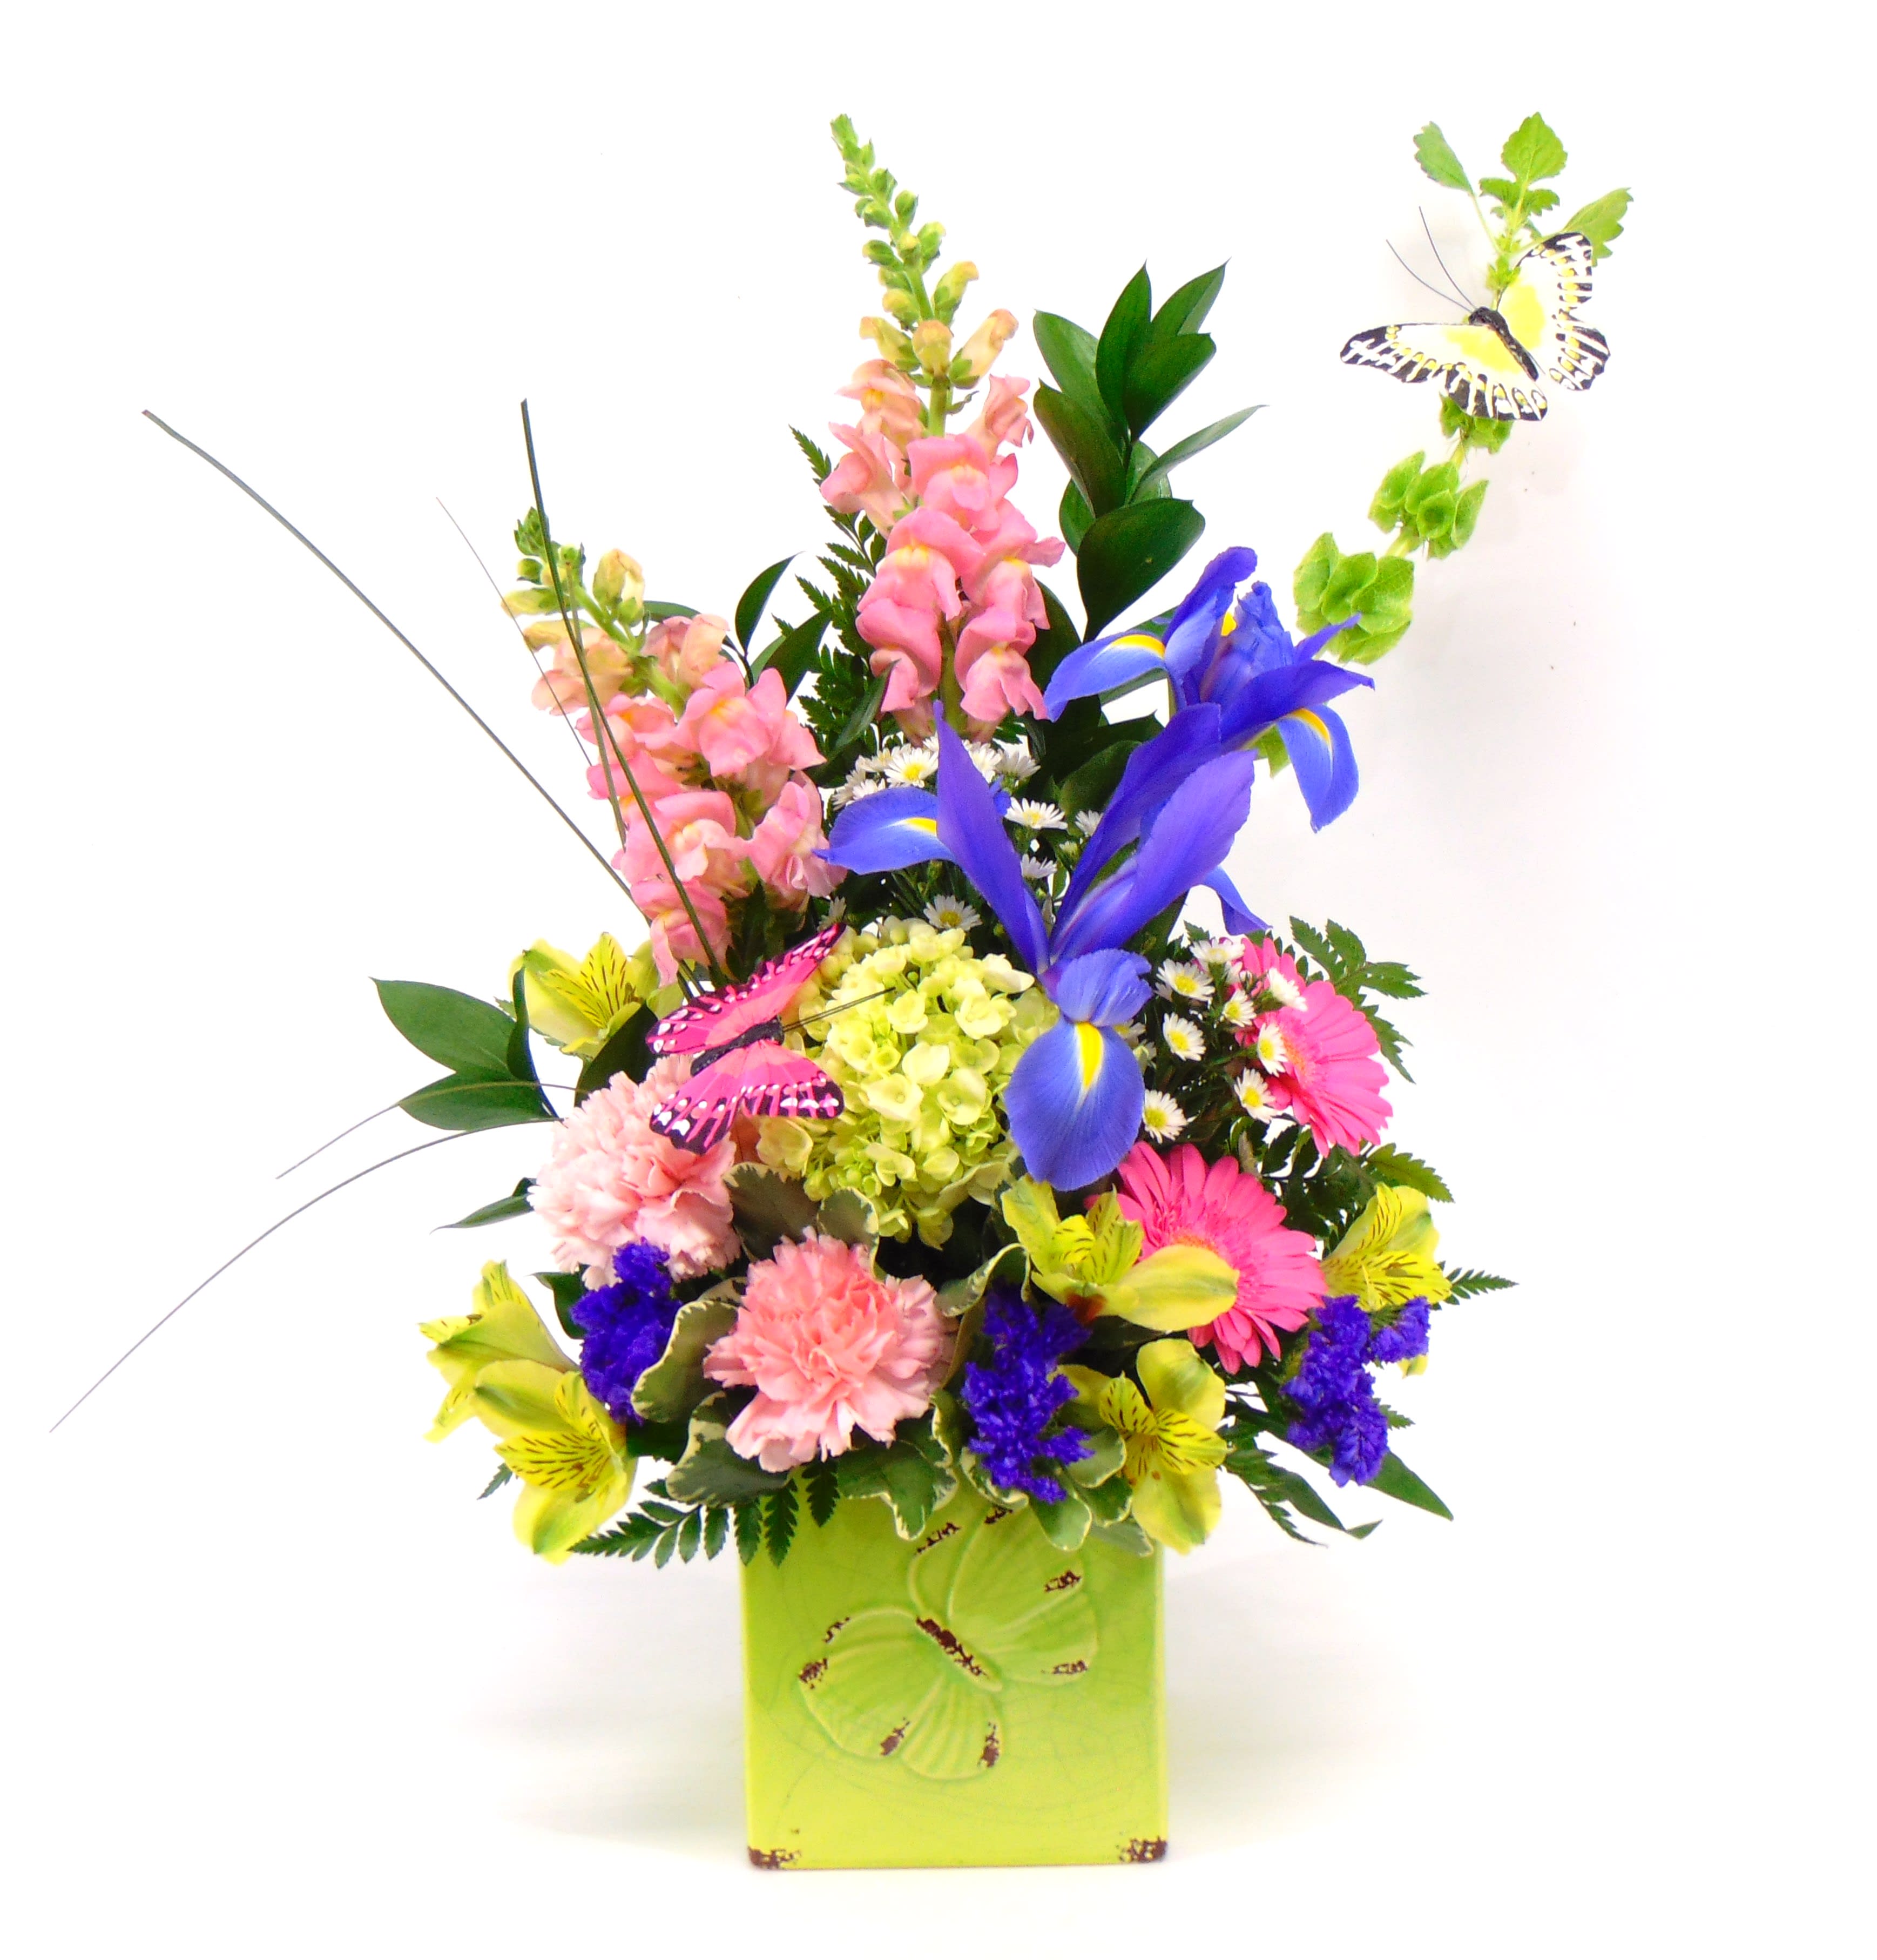 Butterfly Medley - This custom design features a keepsake butterfly embossed cube filled with an array of fresh blooms accented with butterfies. The blooming array includes snapdragons, bells of ireland, carnations, hydrangea, gerbera daisies, iris and alstroemeria. Container colors vary.